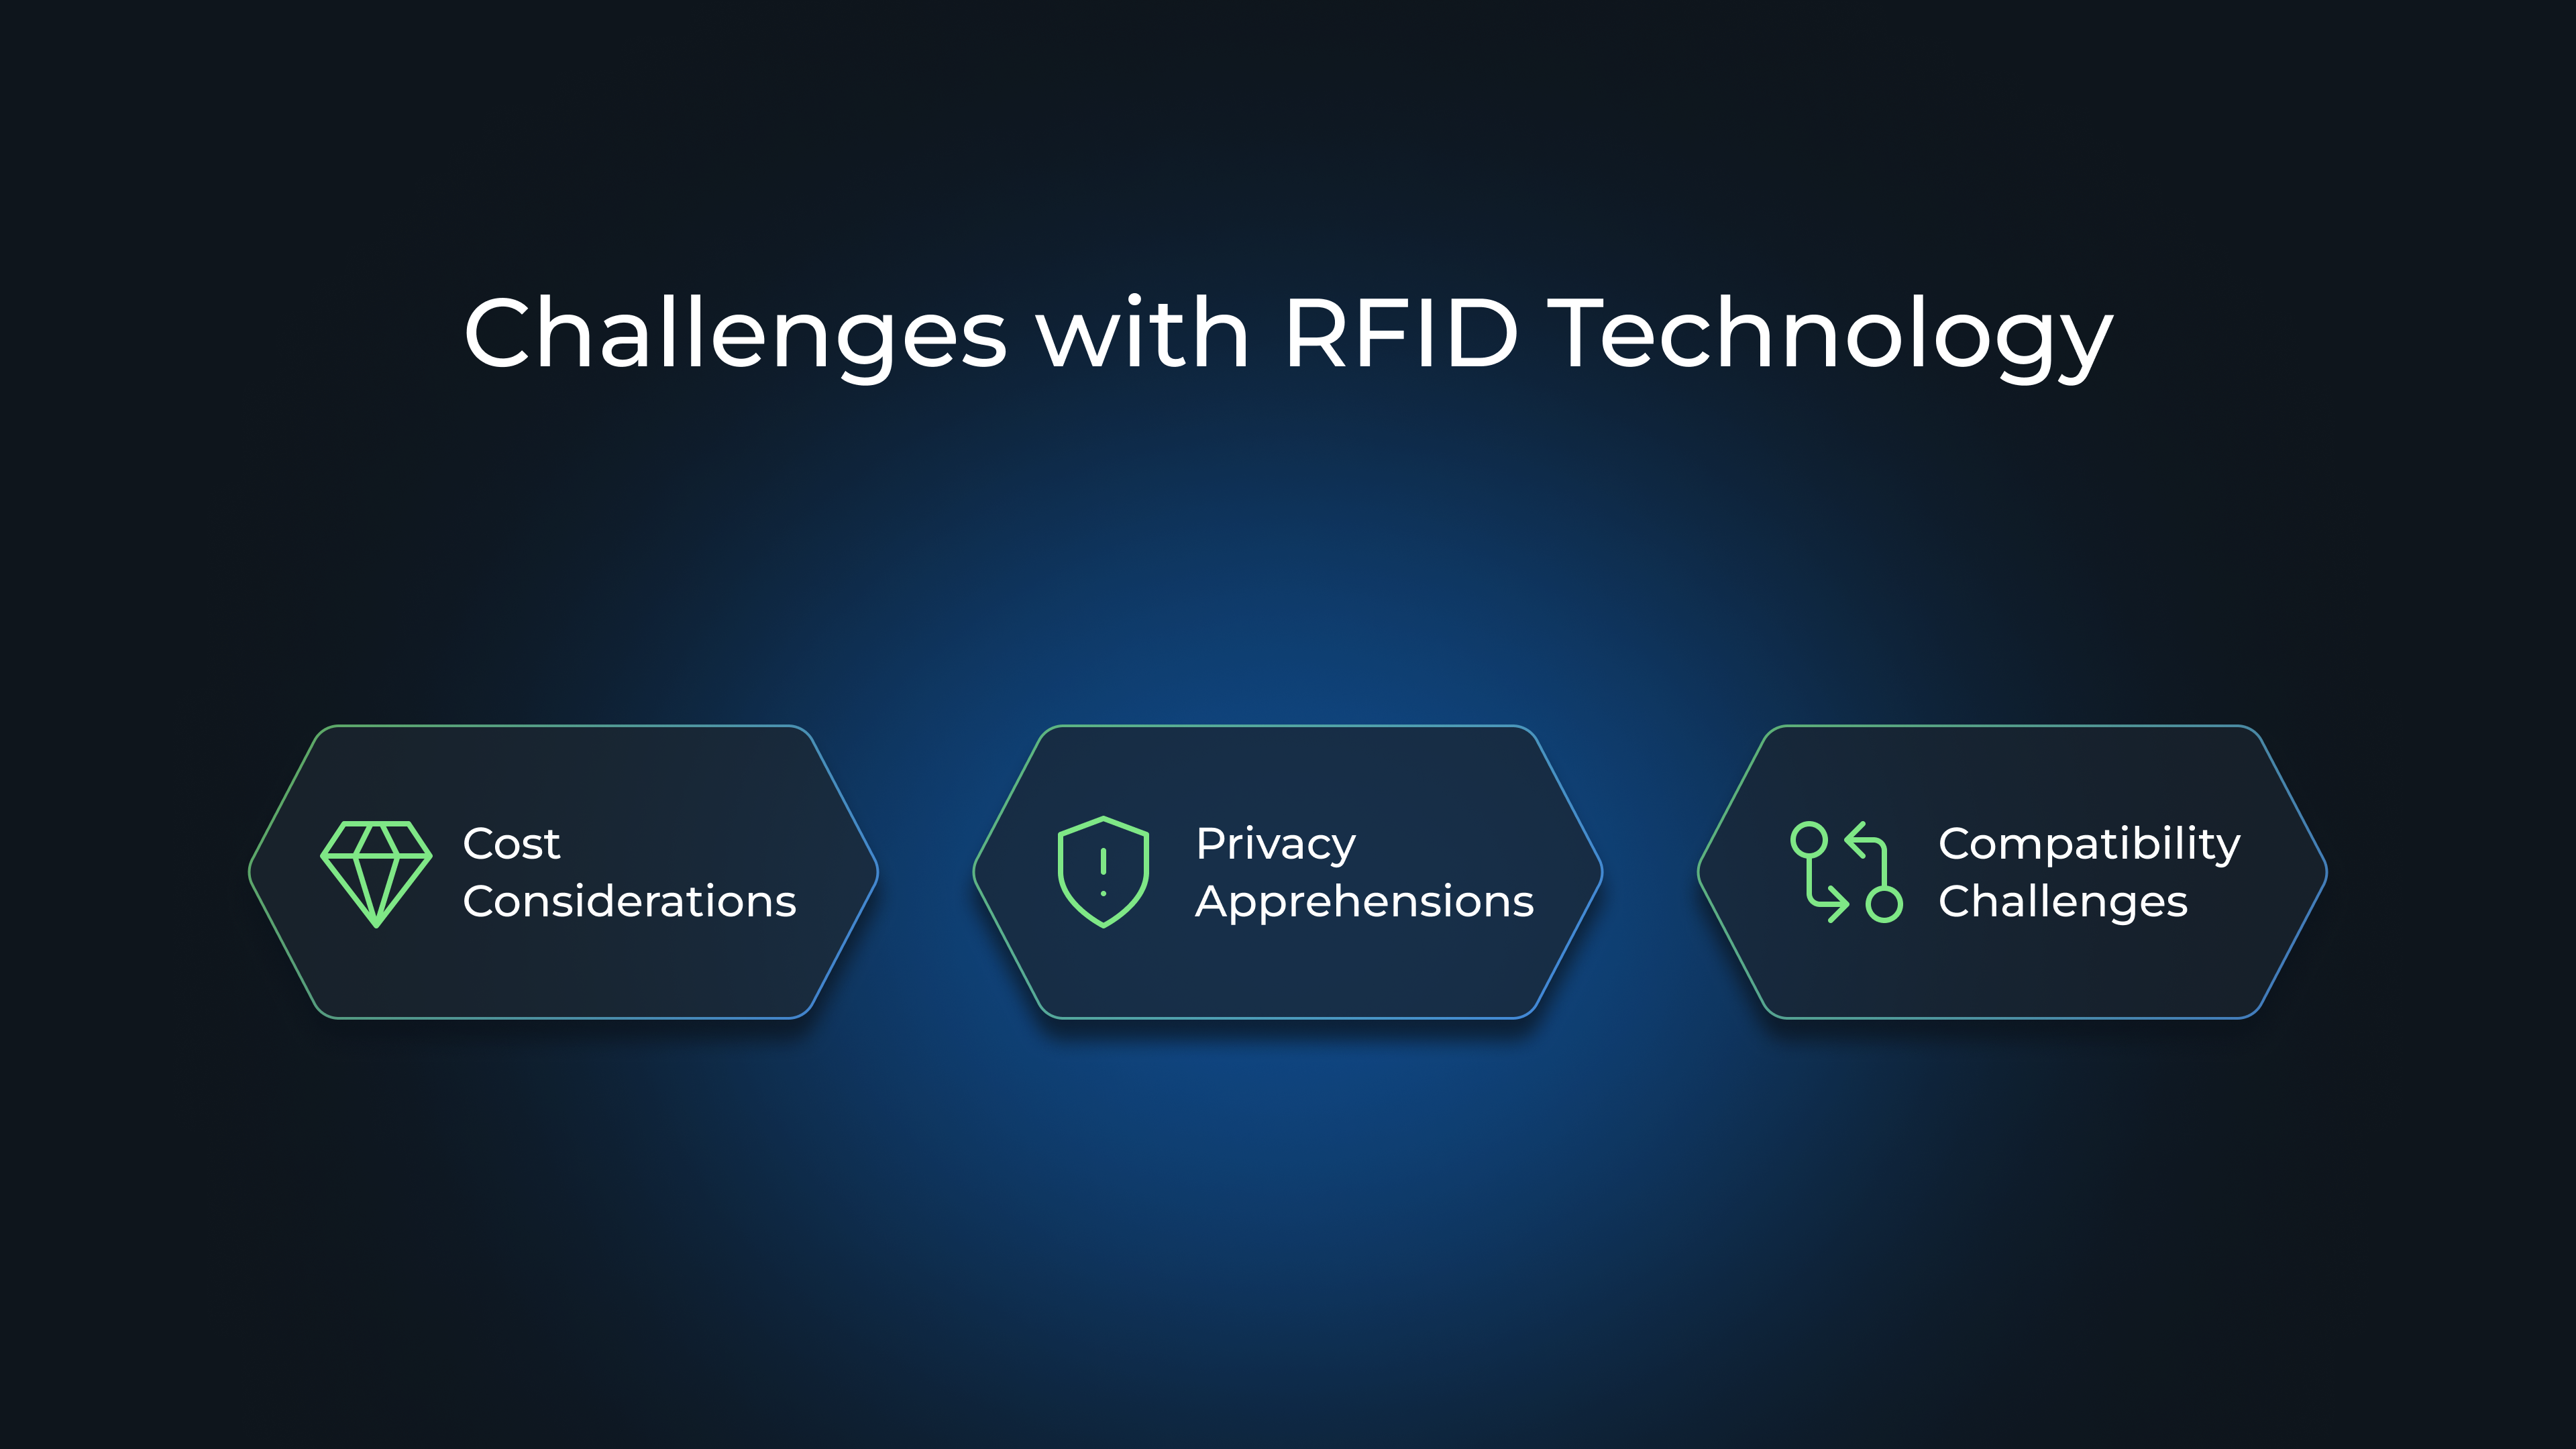 Challenges with RFID Technology: Cost Considerations, Privacy Apprehensions, Compatibility Challenges
